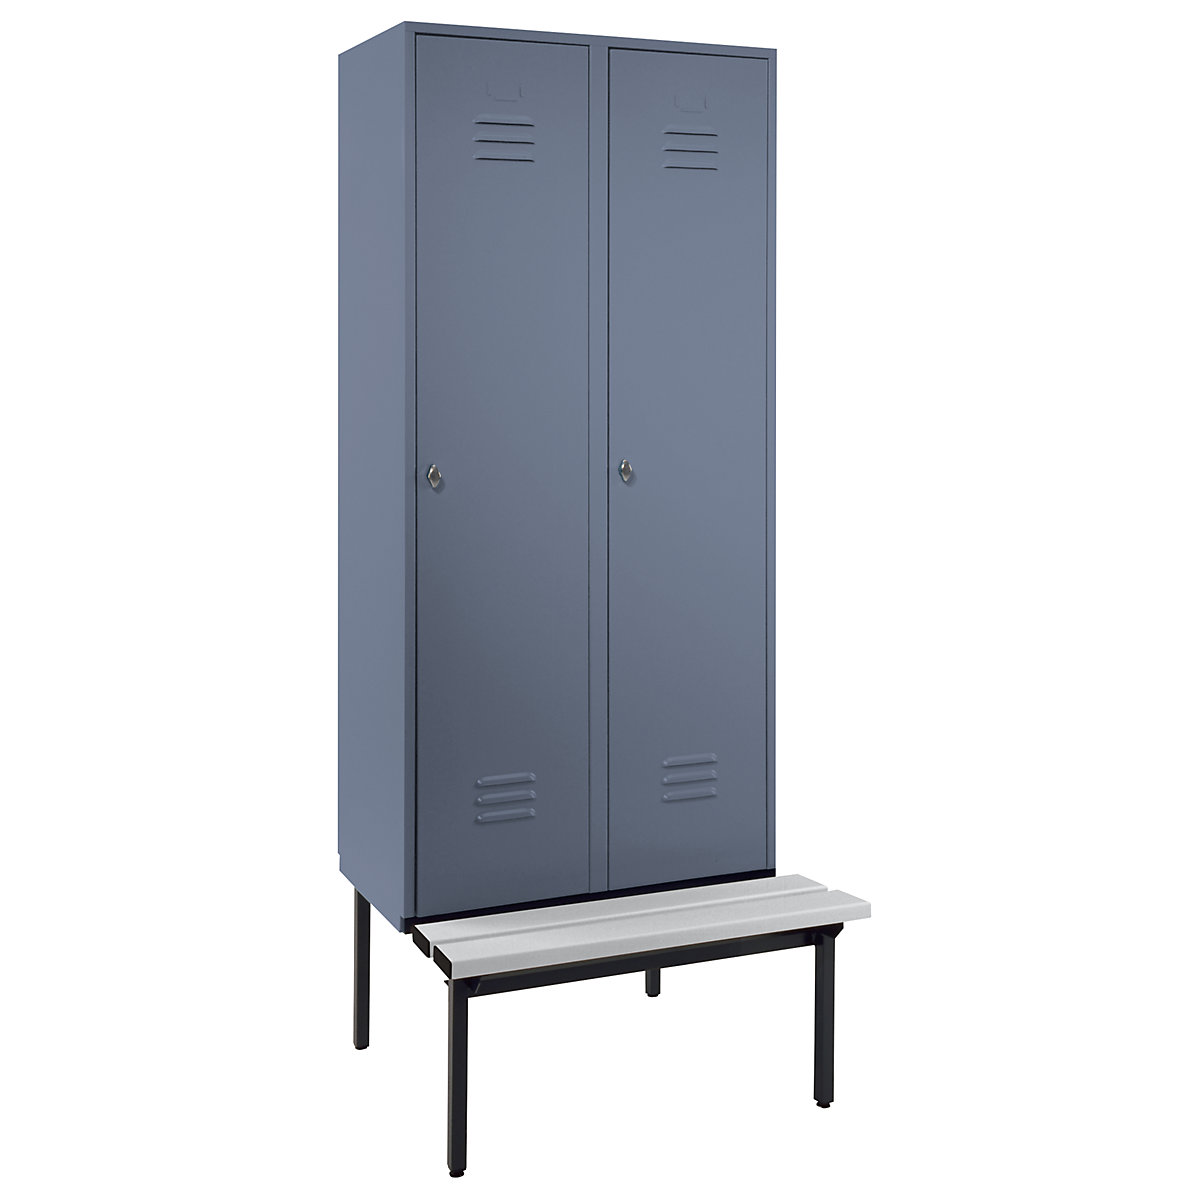 Clothes locker with bench mounted underneath - Wolf